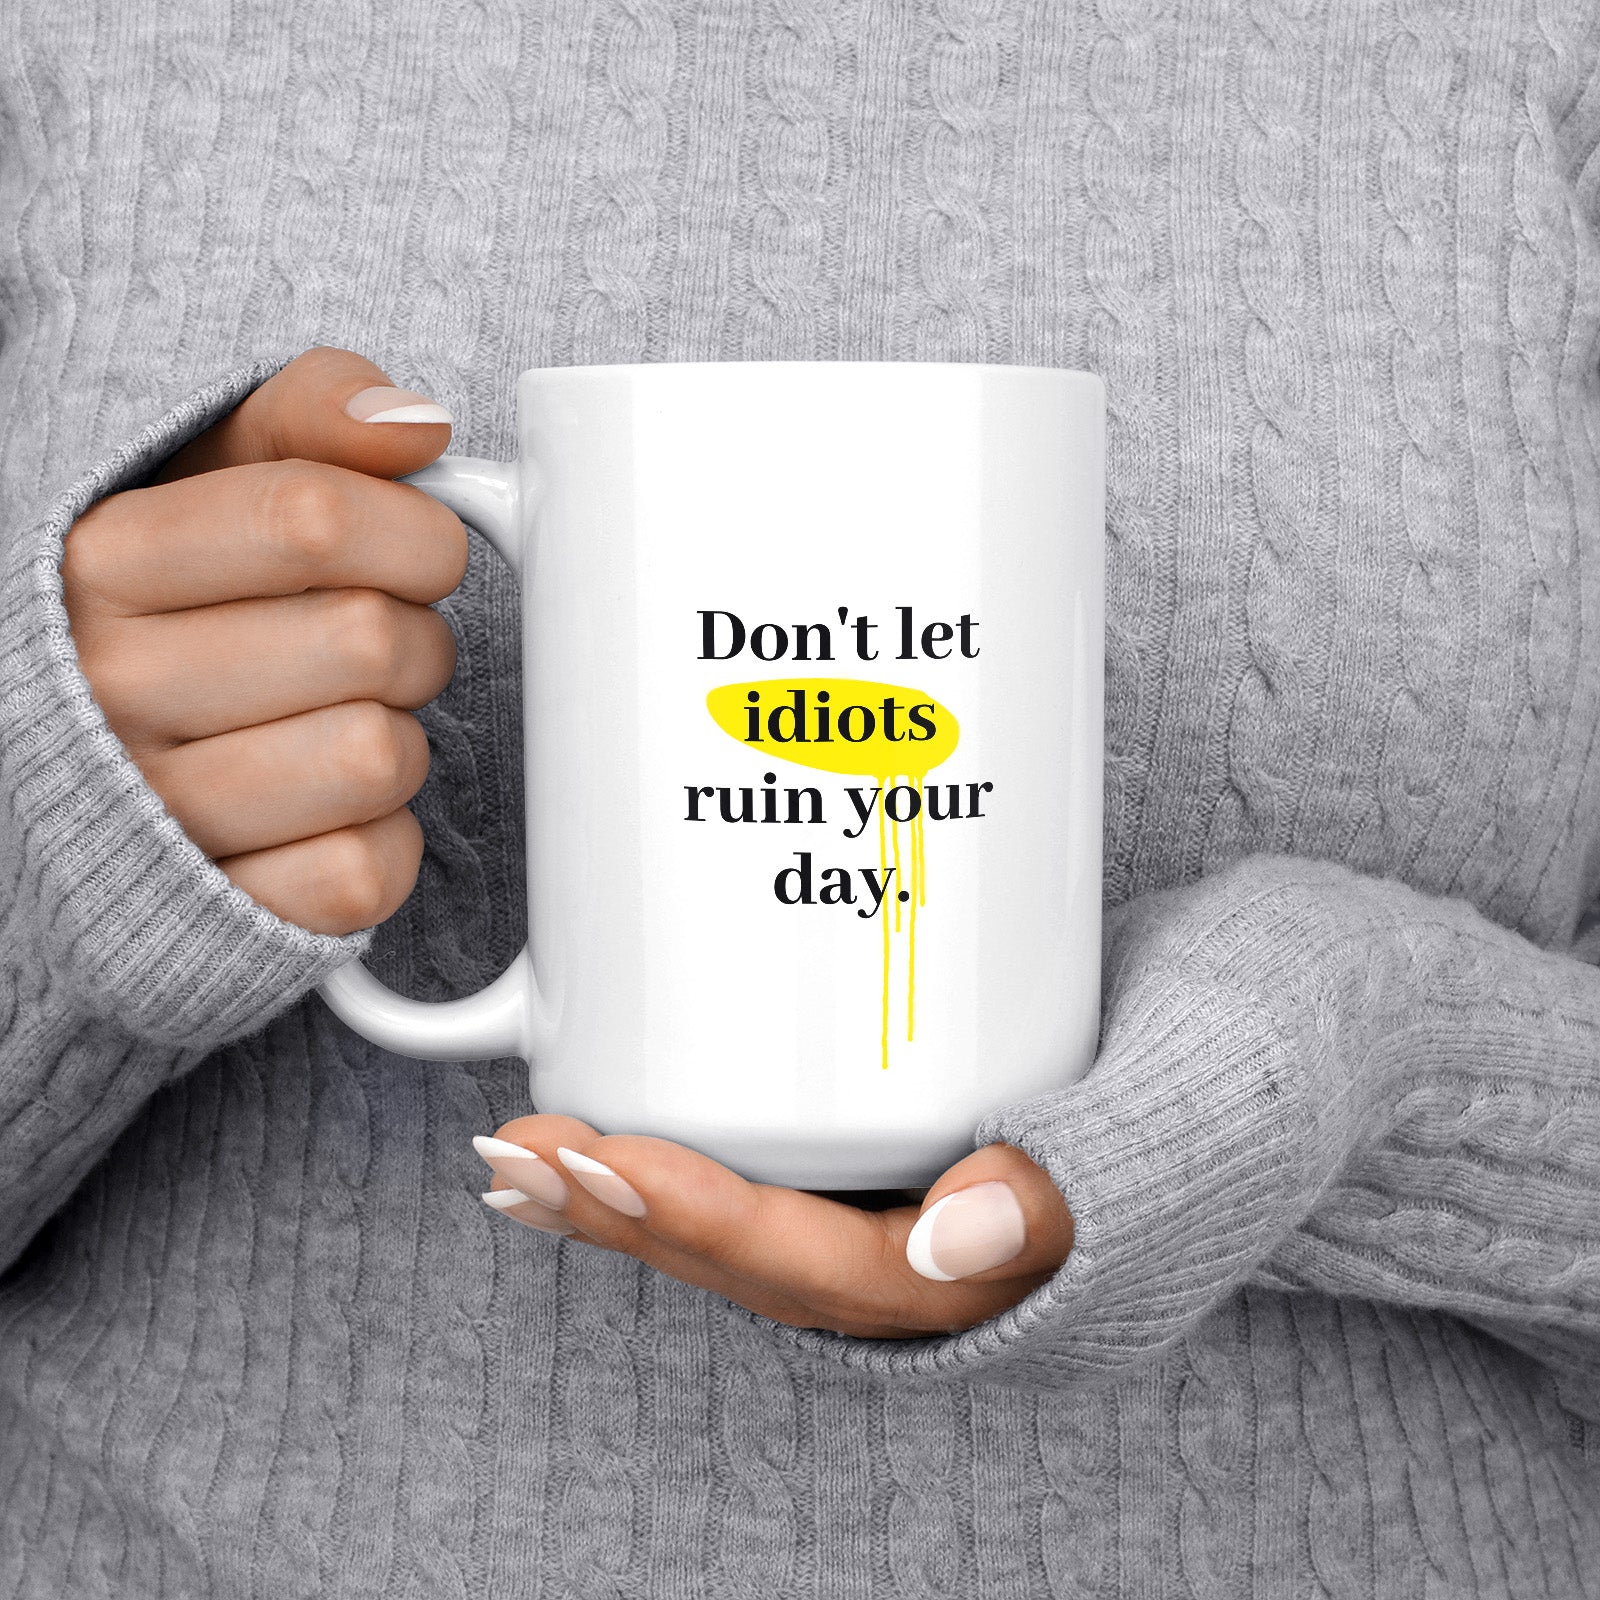 Get inspired by the quote, "Don't let idiots ruin your day" on this 15oz white glossy coffee mug with the handle on the left.